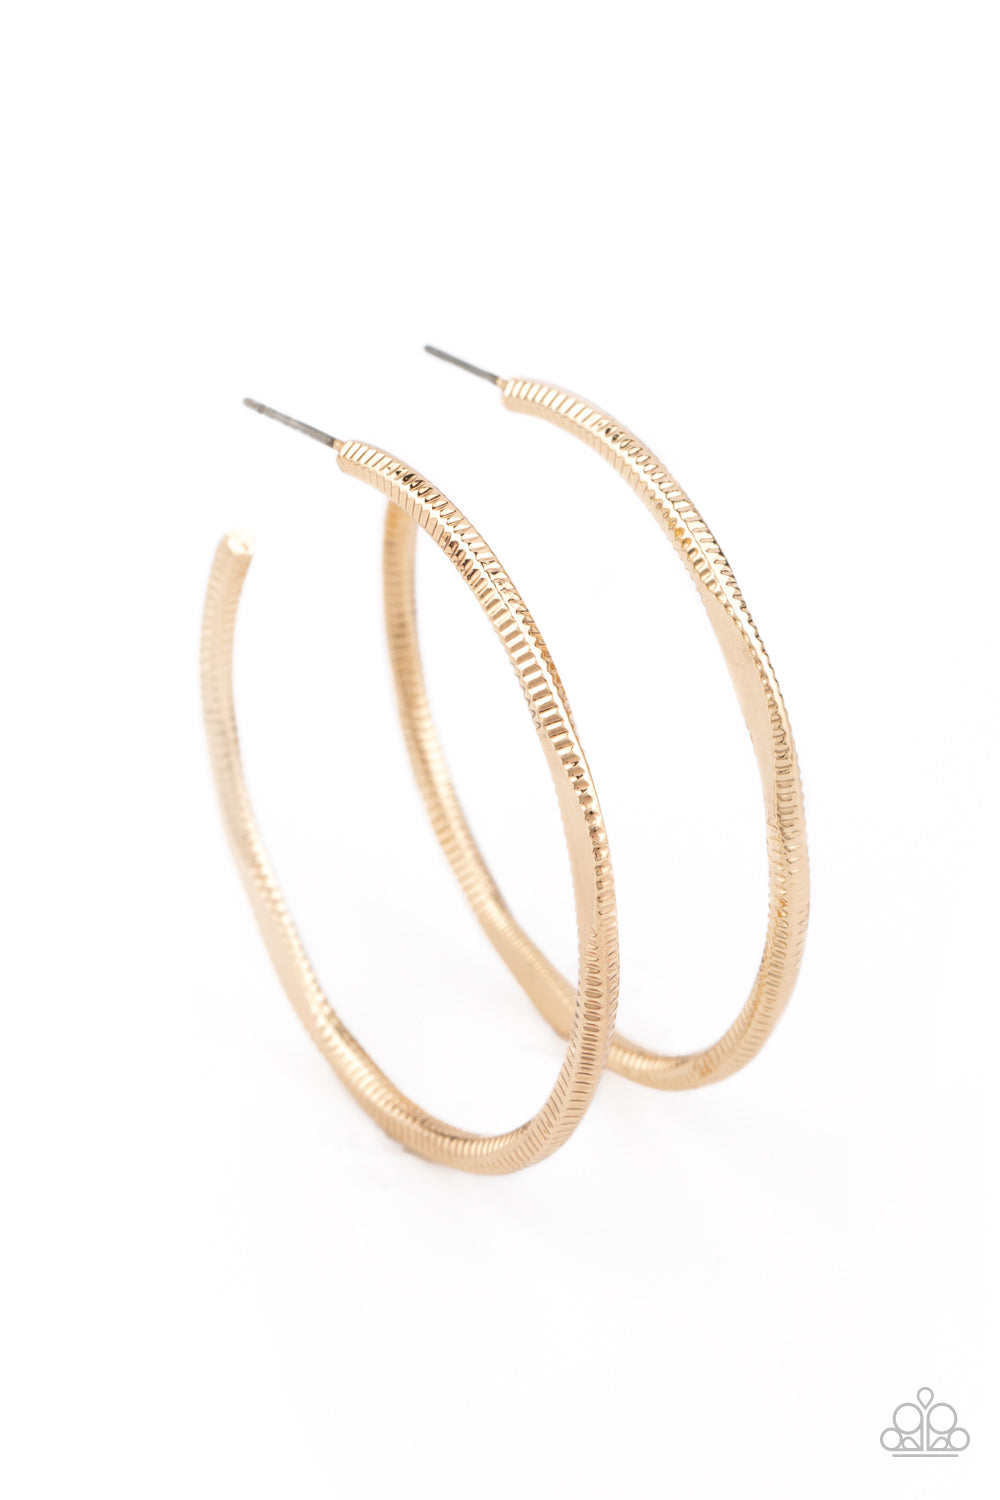 Spitfire Gold Hoop Earring - Paparazzi Accessories